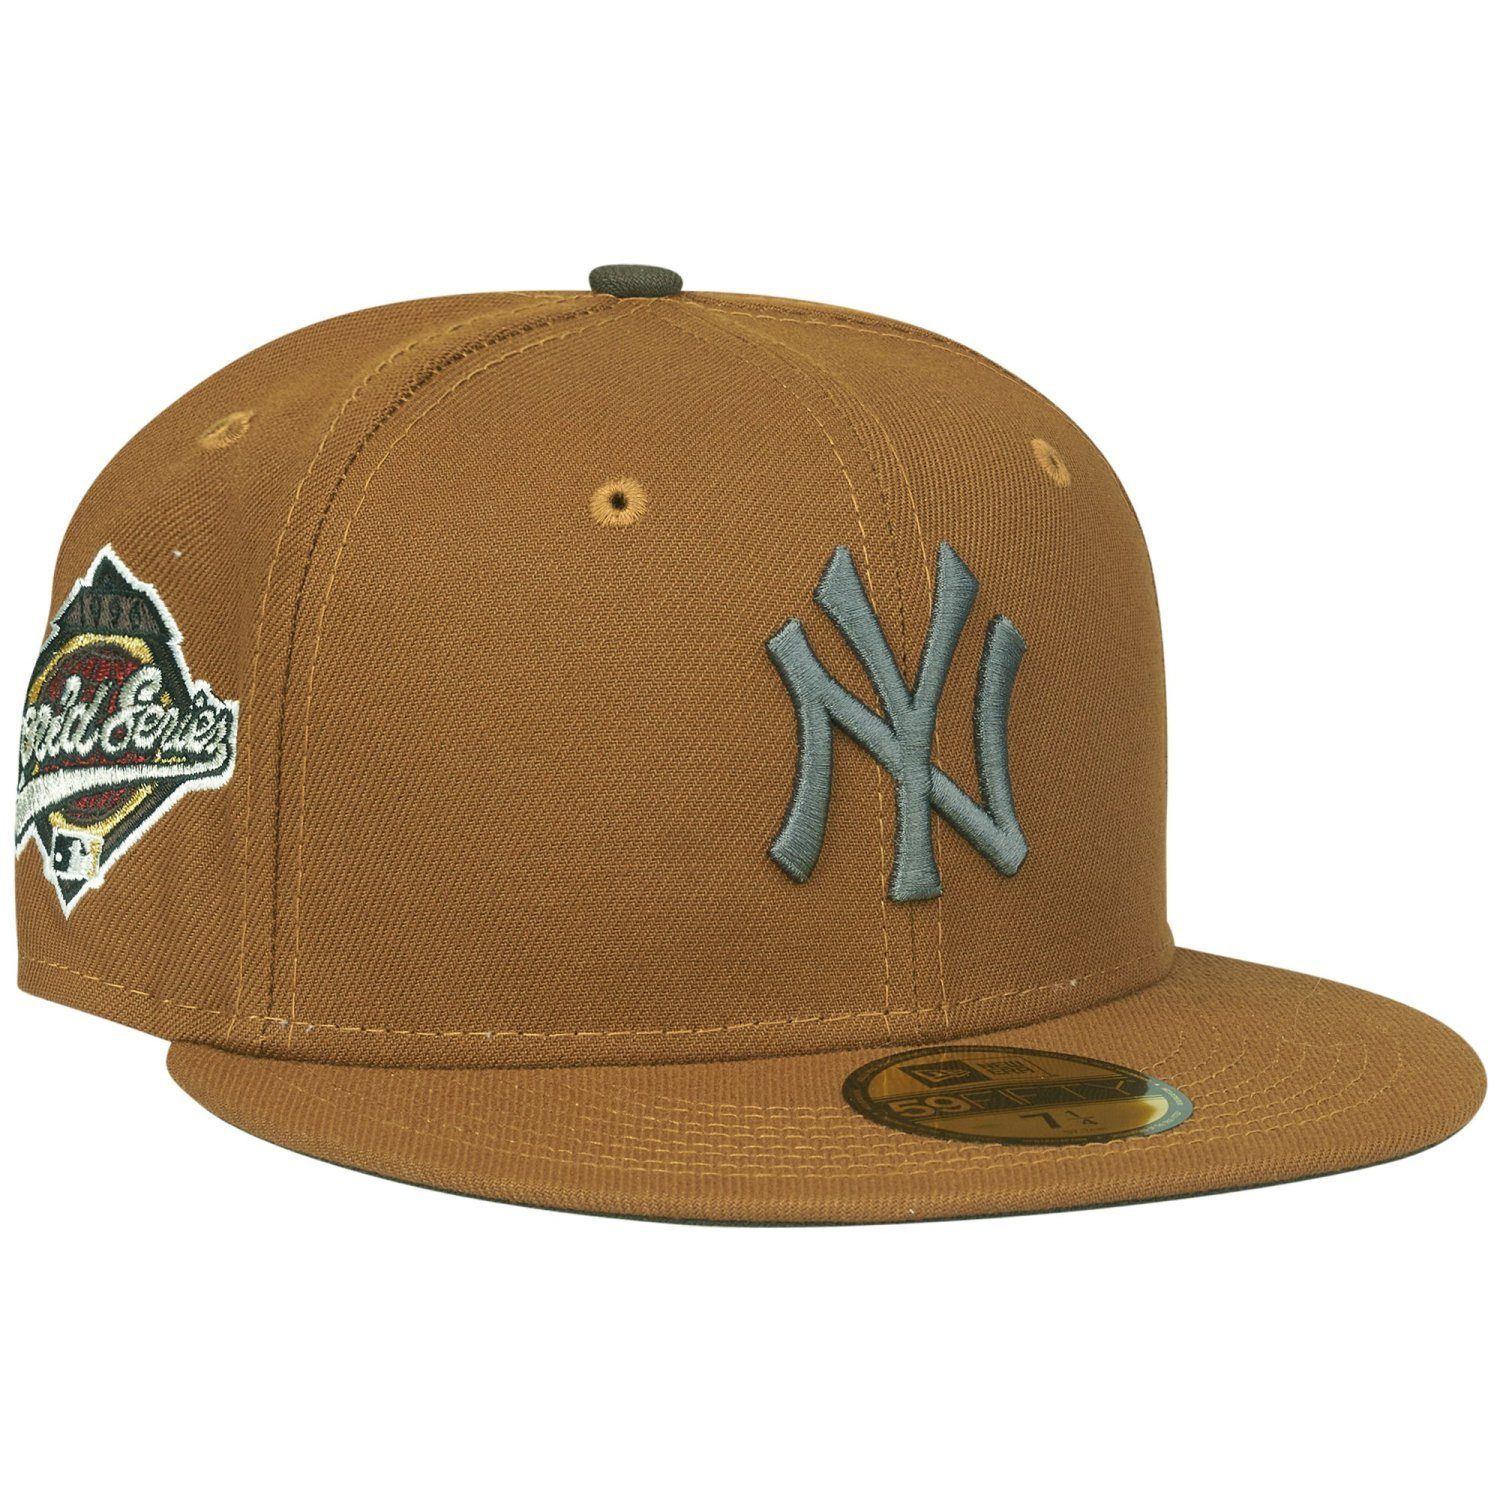 New Era Fitted Cap 59Fifty WORLD SERIES 1996 NY Yankees